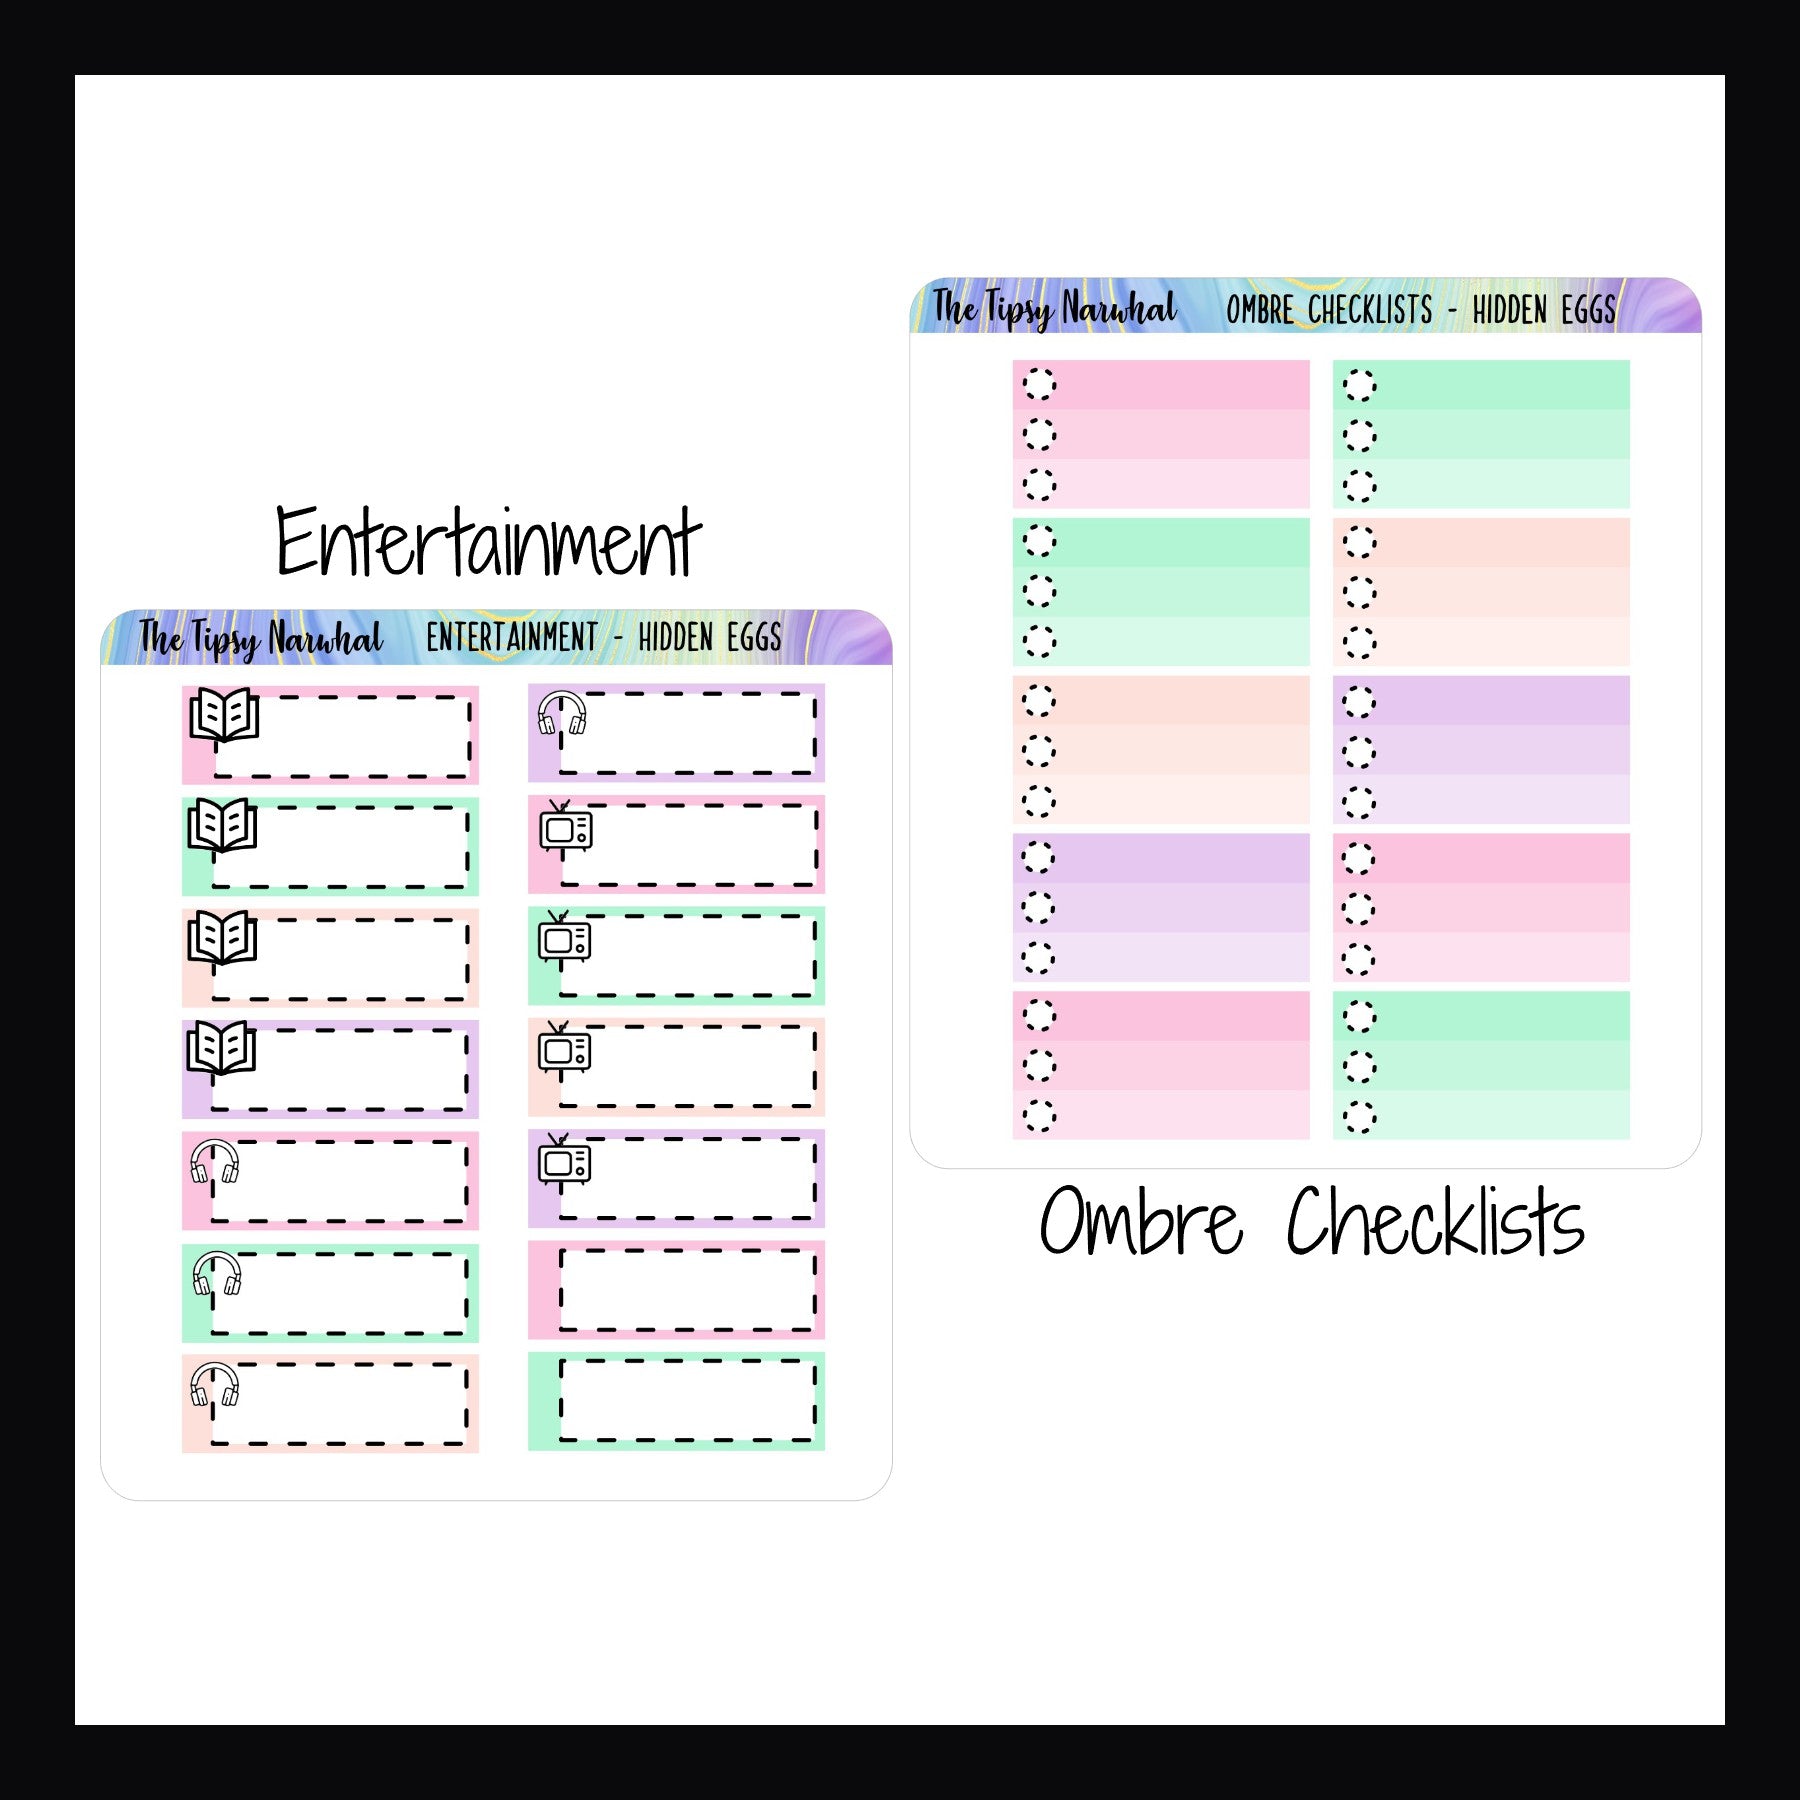 Digital Hidden Eggs Functional add-ons the Entertainment sheet and the ombre checklist sheet